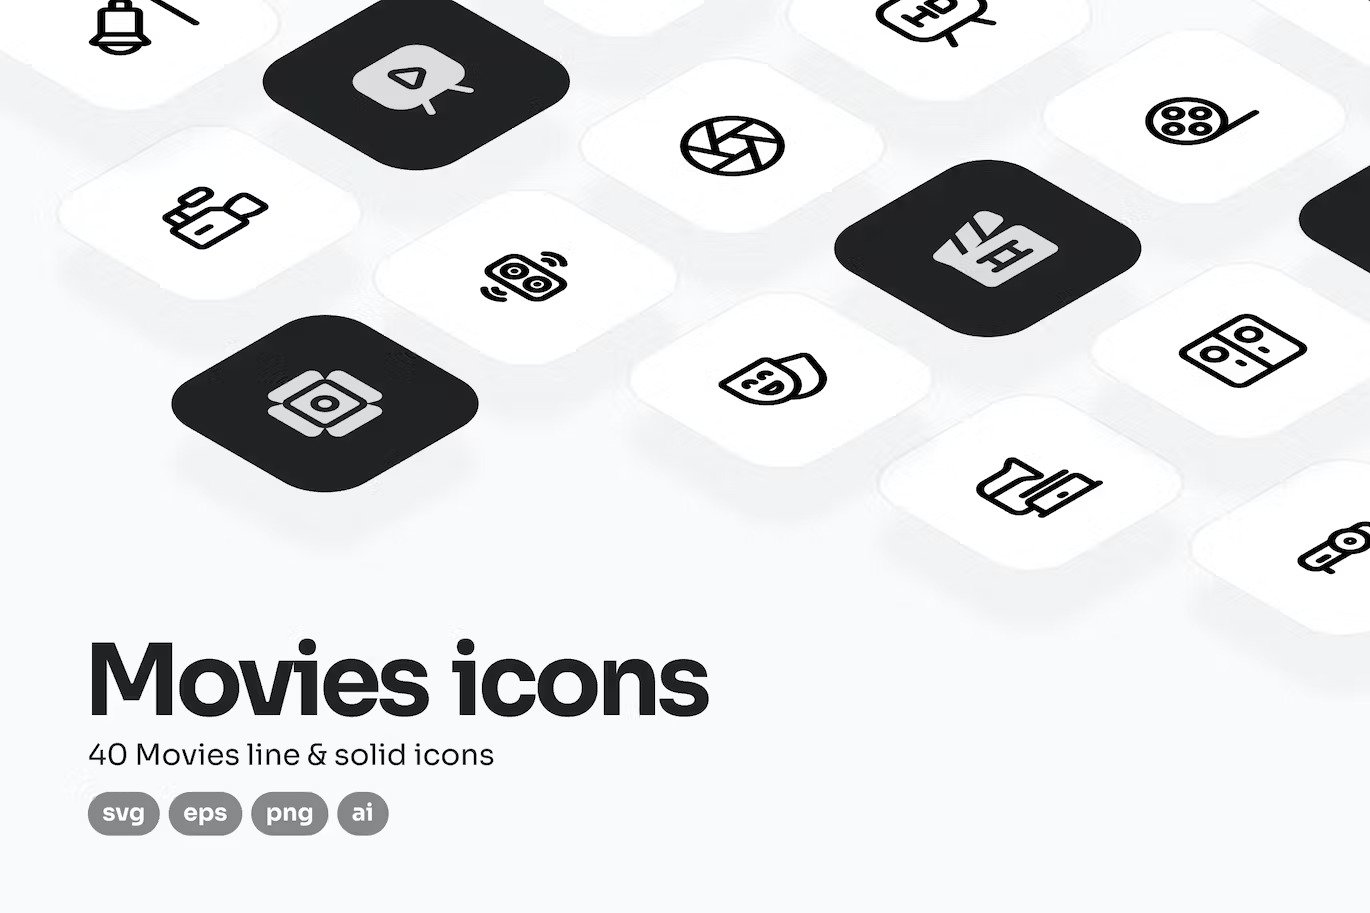 A set of movie line and solid icons